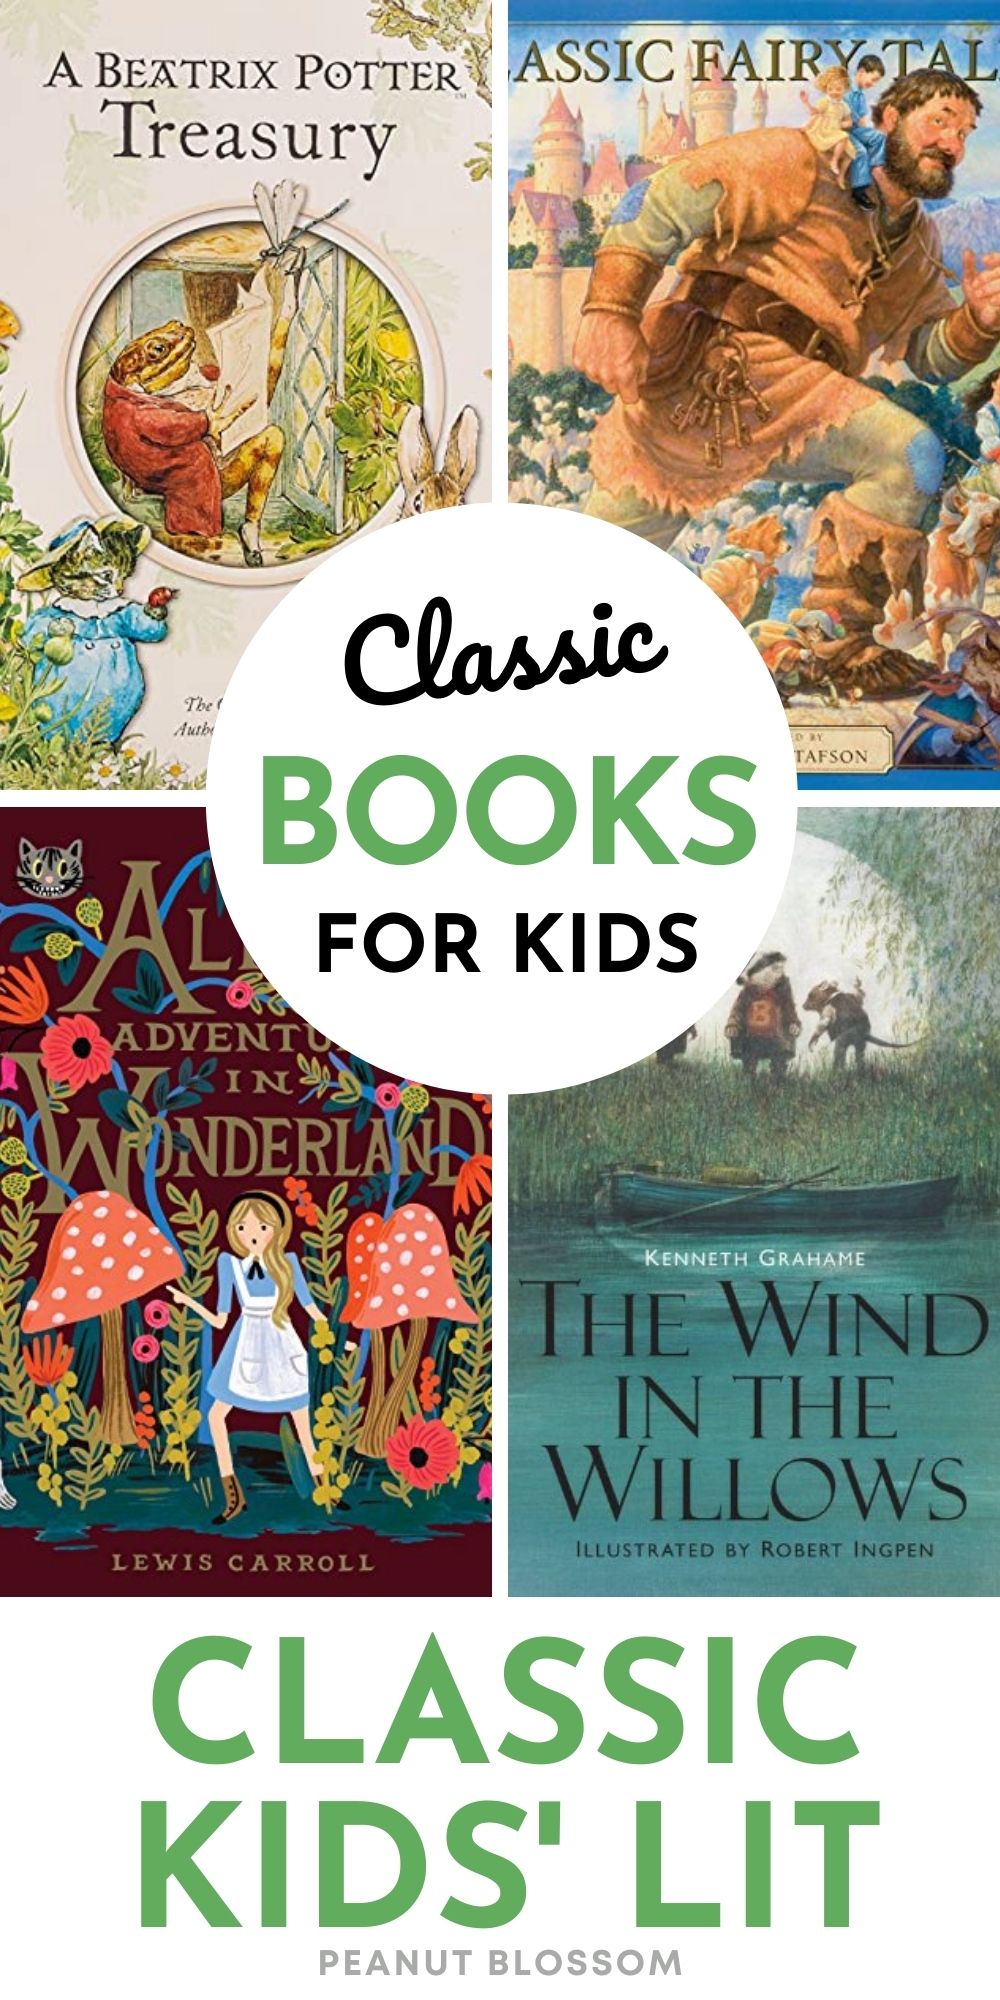 A collage shows several book covers of classic books for kids.